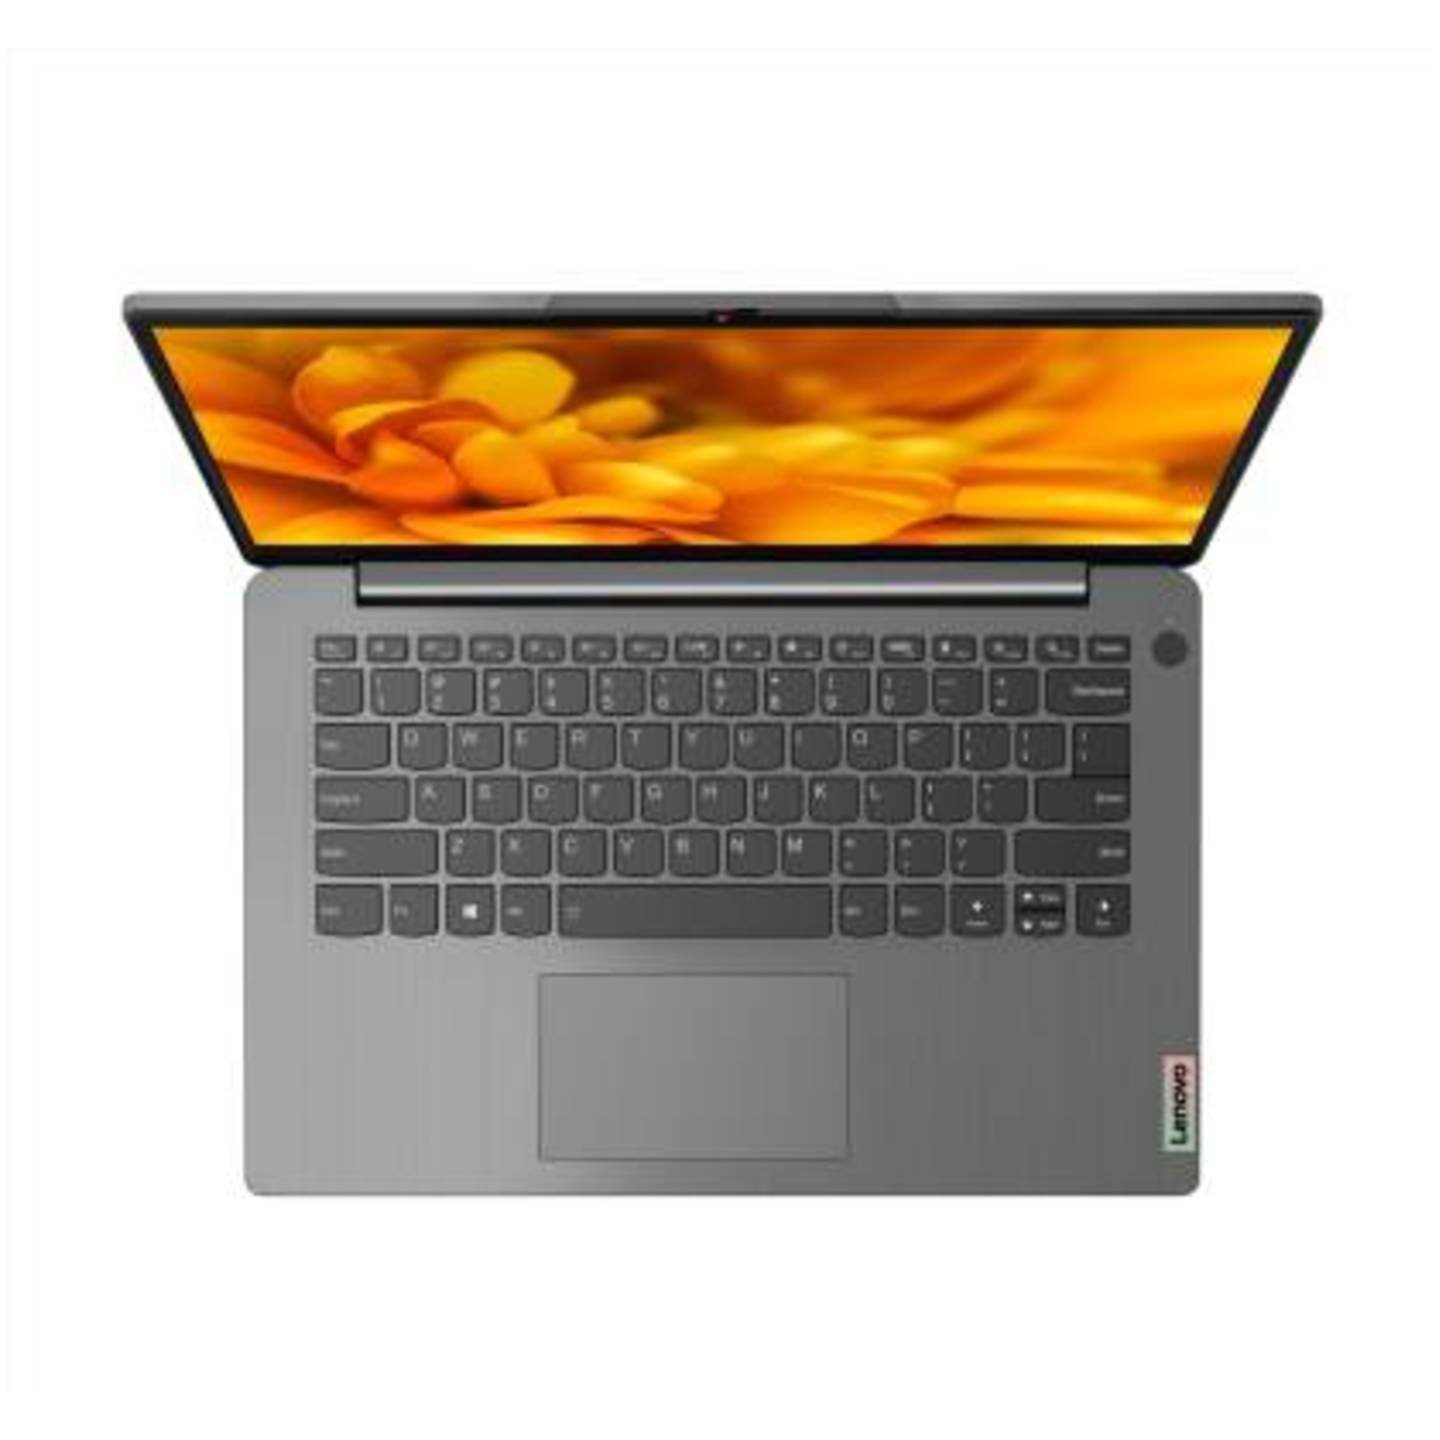 Lenovo IdeaPad Slim 3i (2021) Core i3 11th Gen - (8 GB/256 GB SSD/Windows 10 Home) IdeaPad 3 14ITL6 Thin and Light Laptop  (14 Inch, Arctic Grey, 1.41 KG, With MS Office)